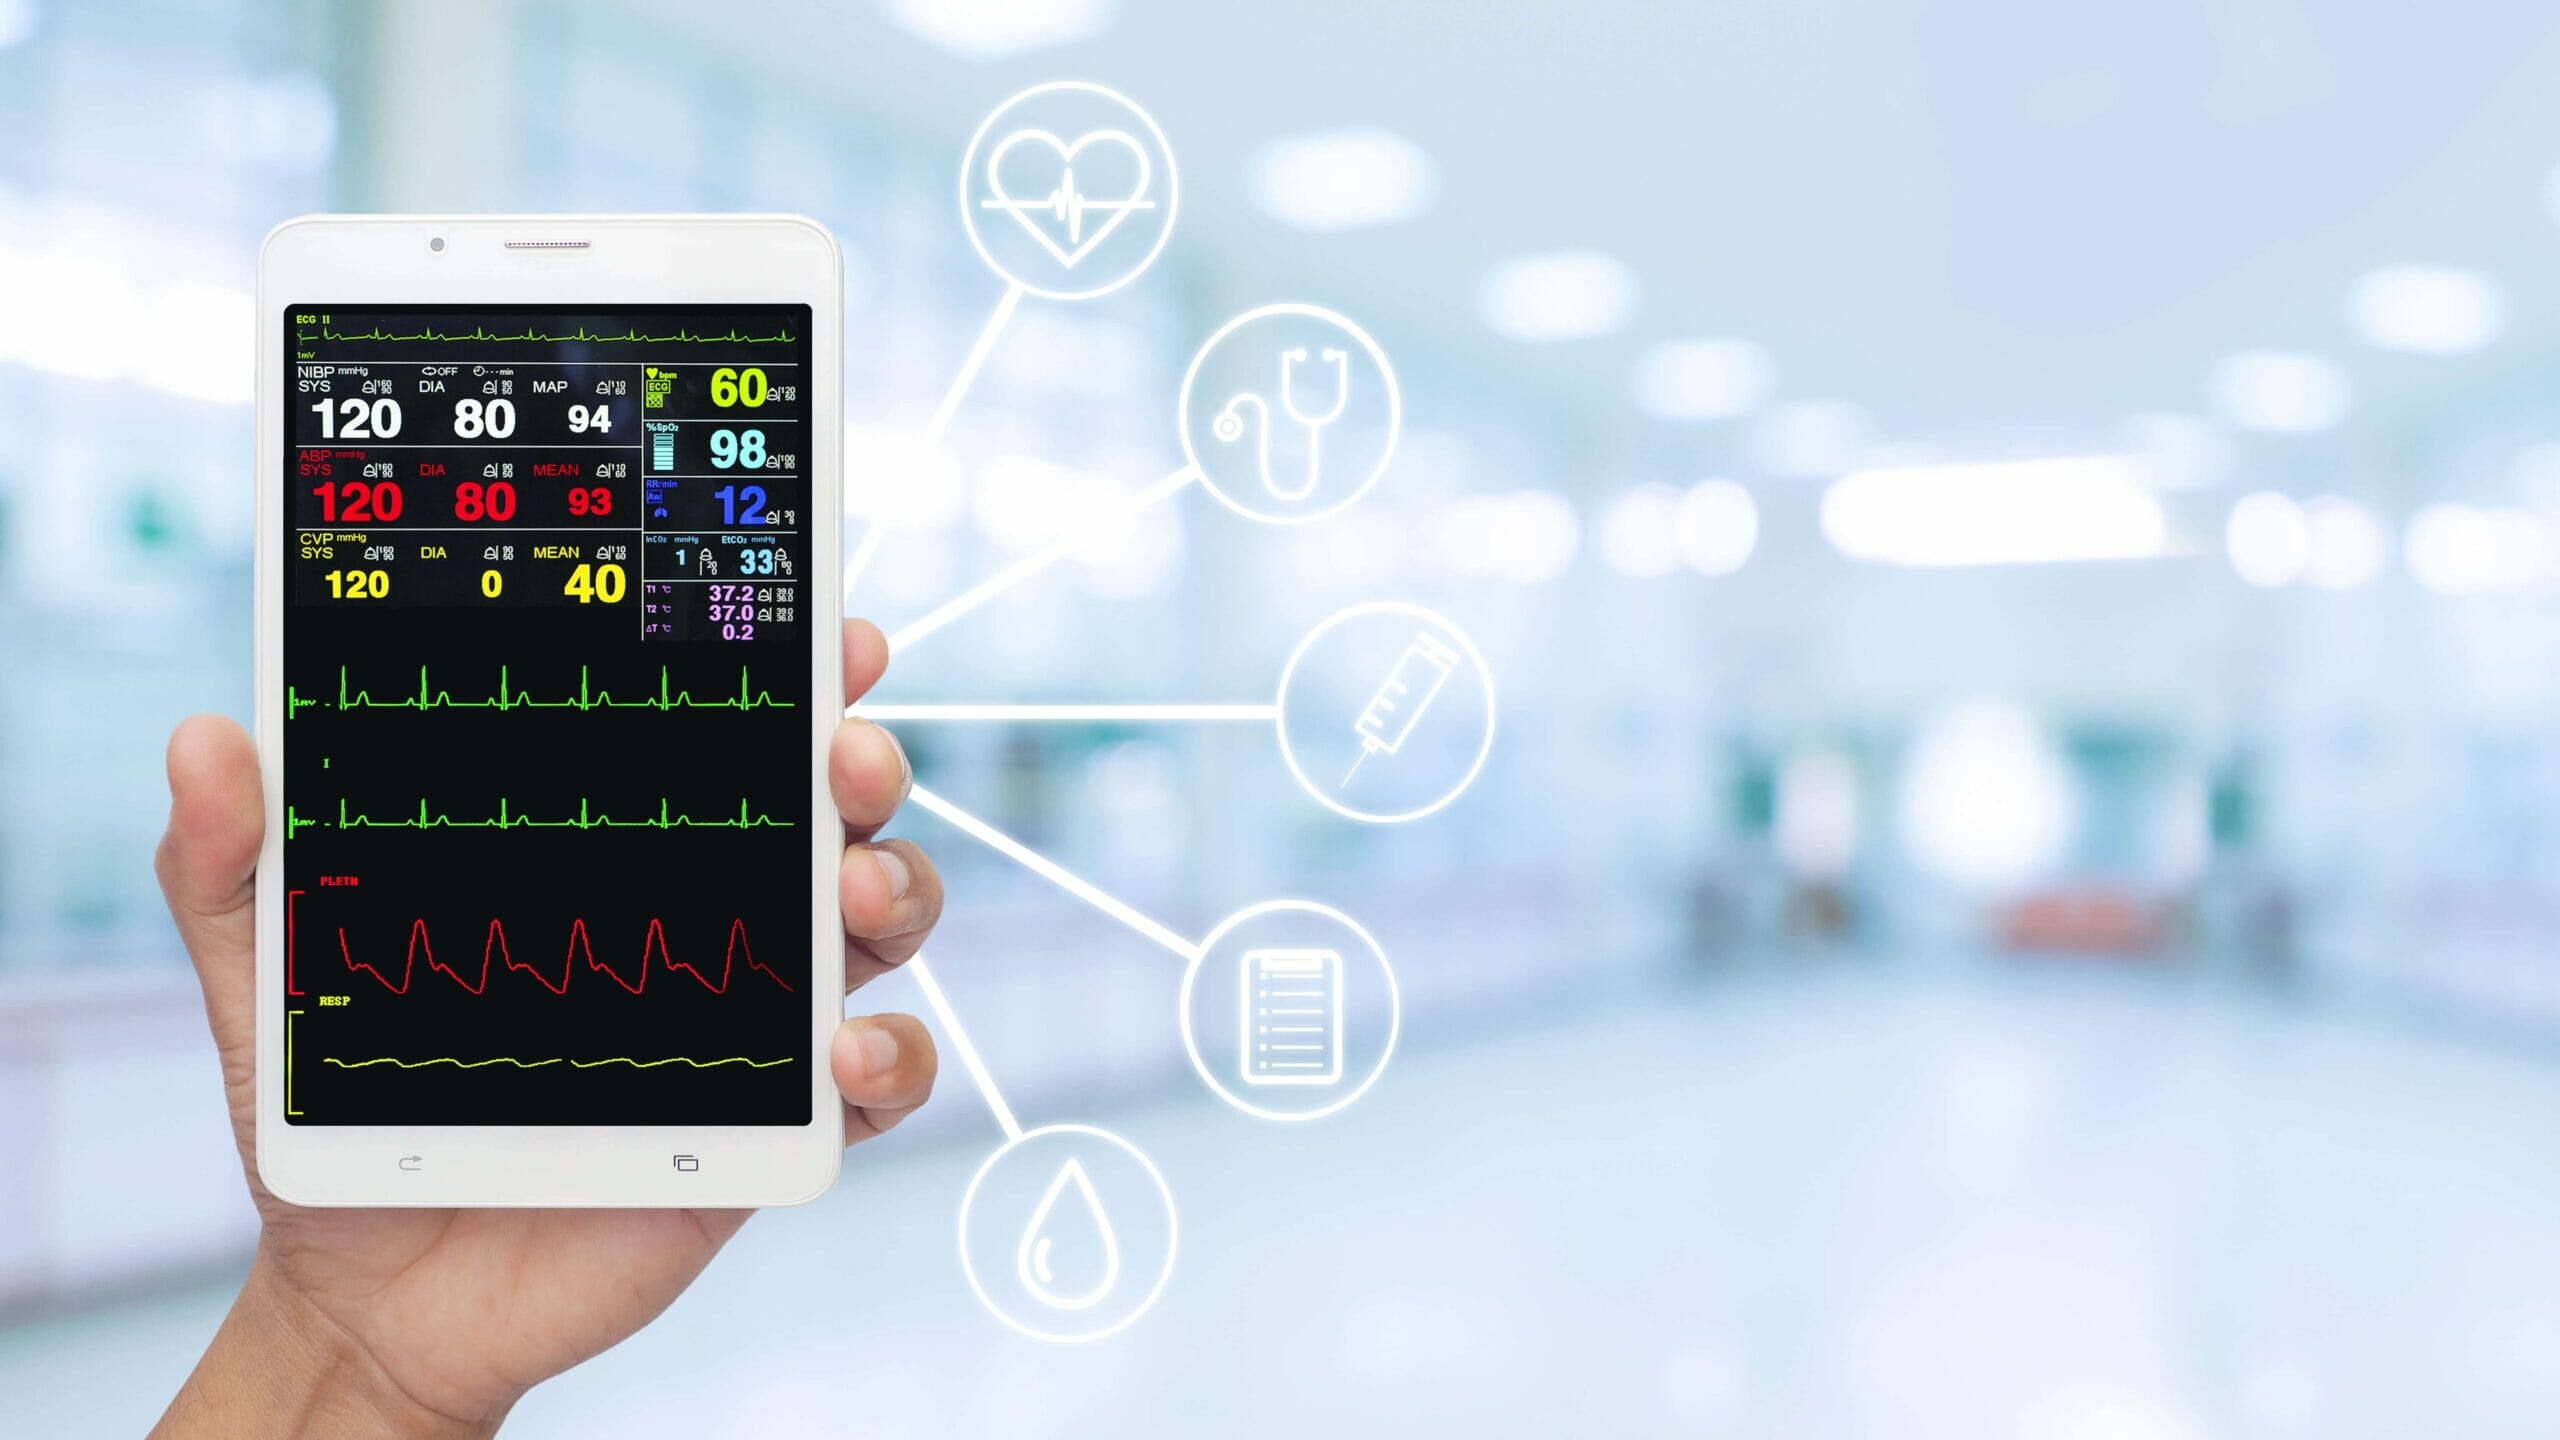 remote patient monitoring device measuring patient’s health